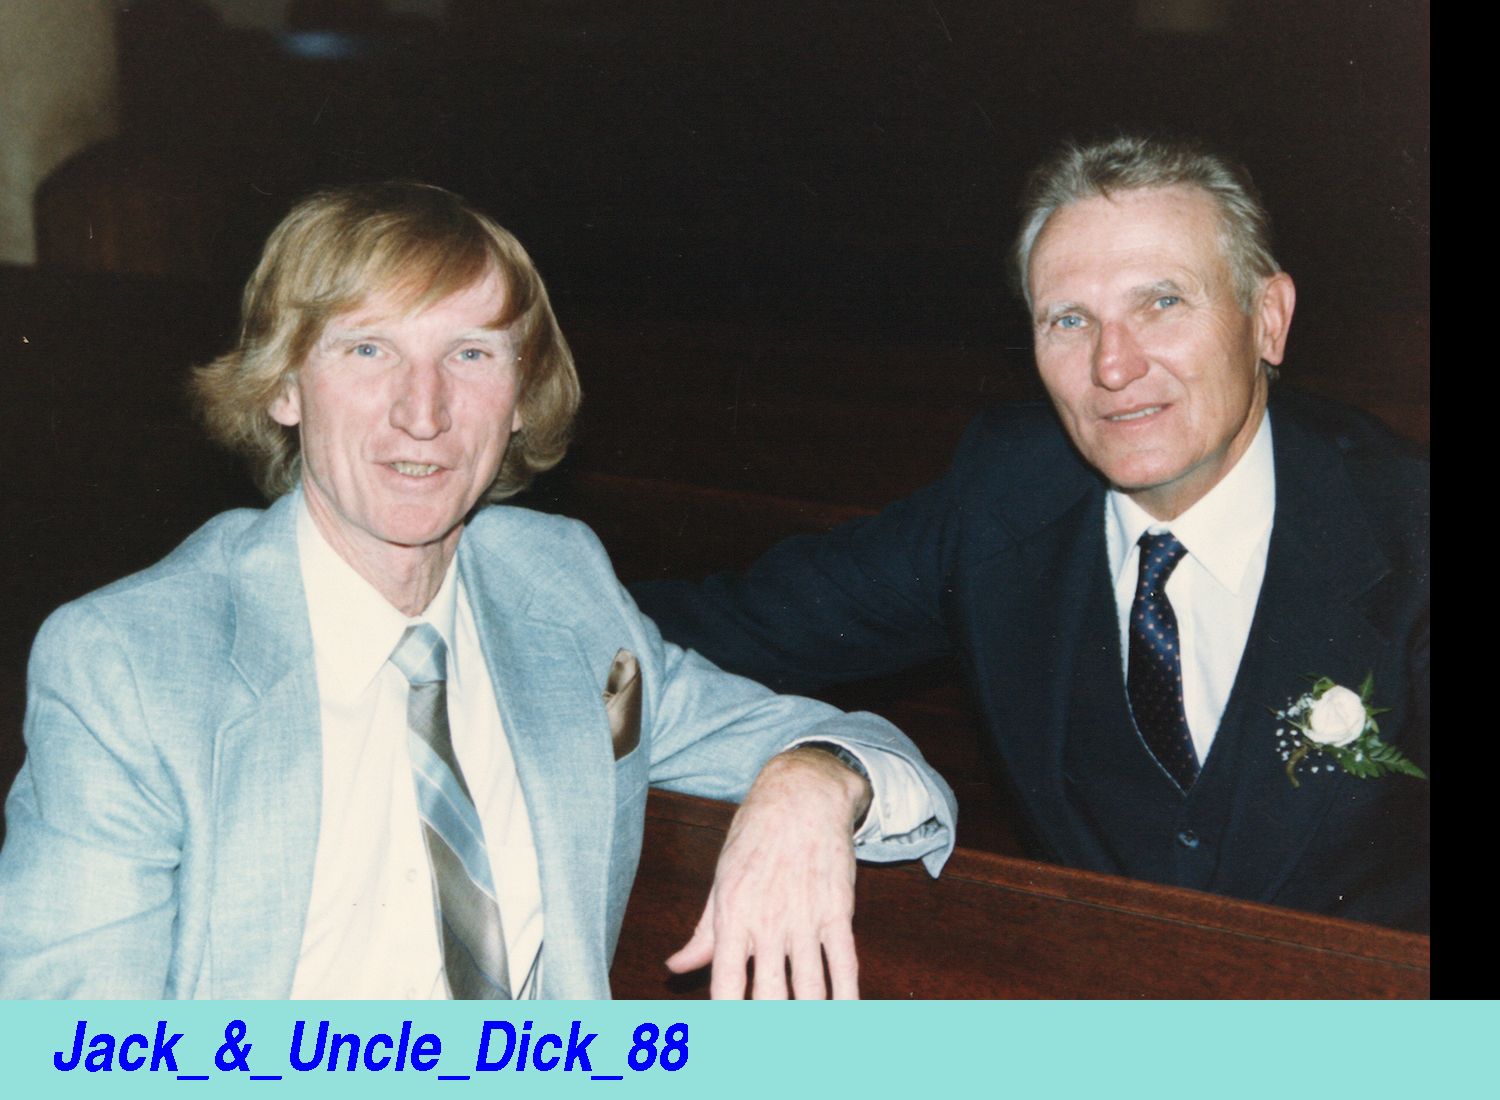 Dick and Jack in 1988